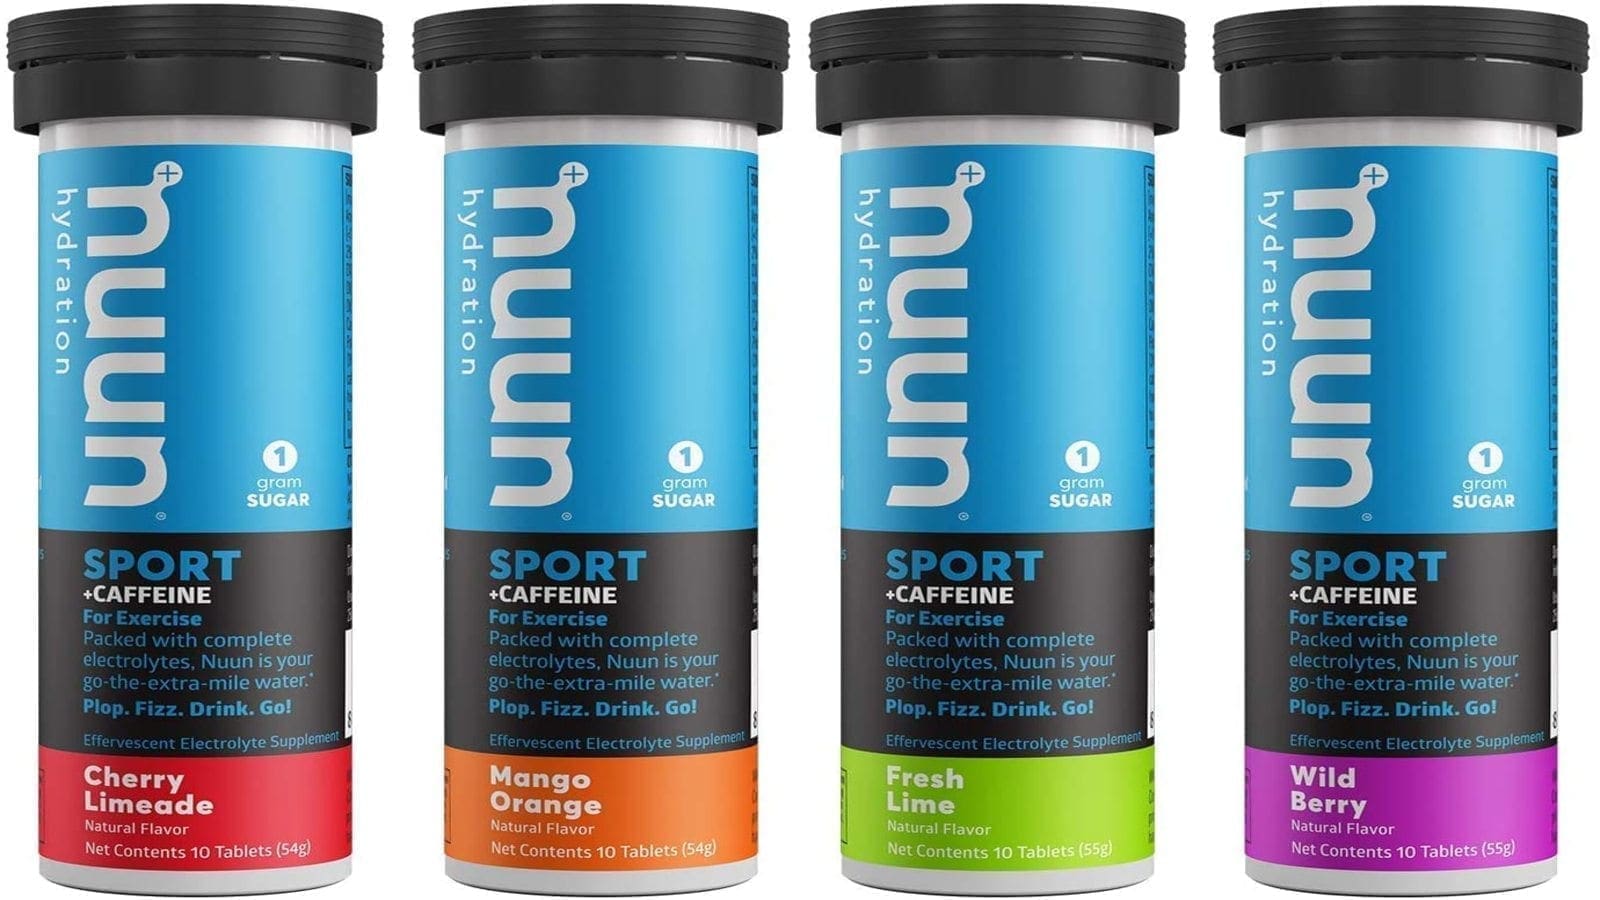 Nestlé Health Science to acquire functional hydration company Nuun